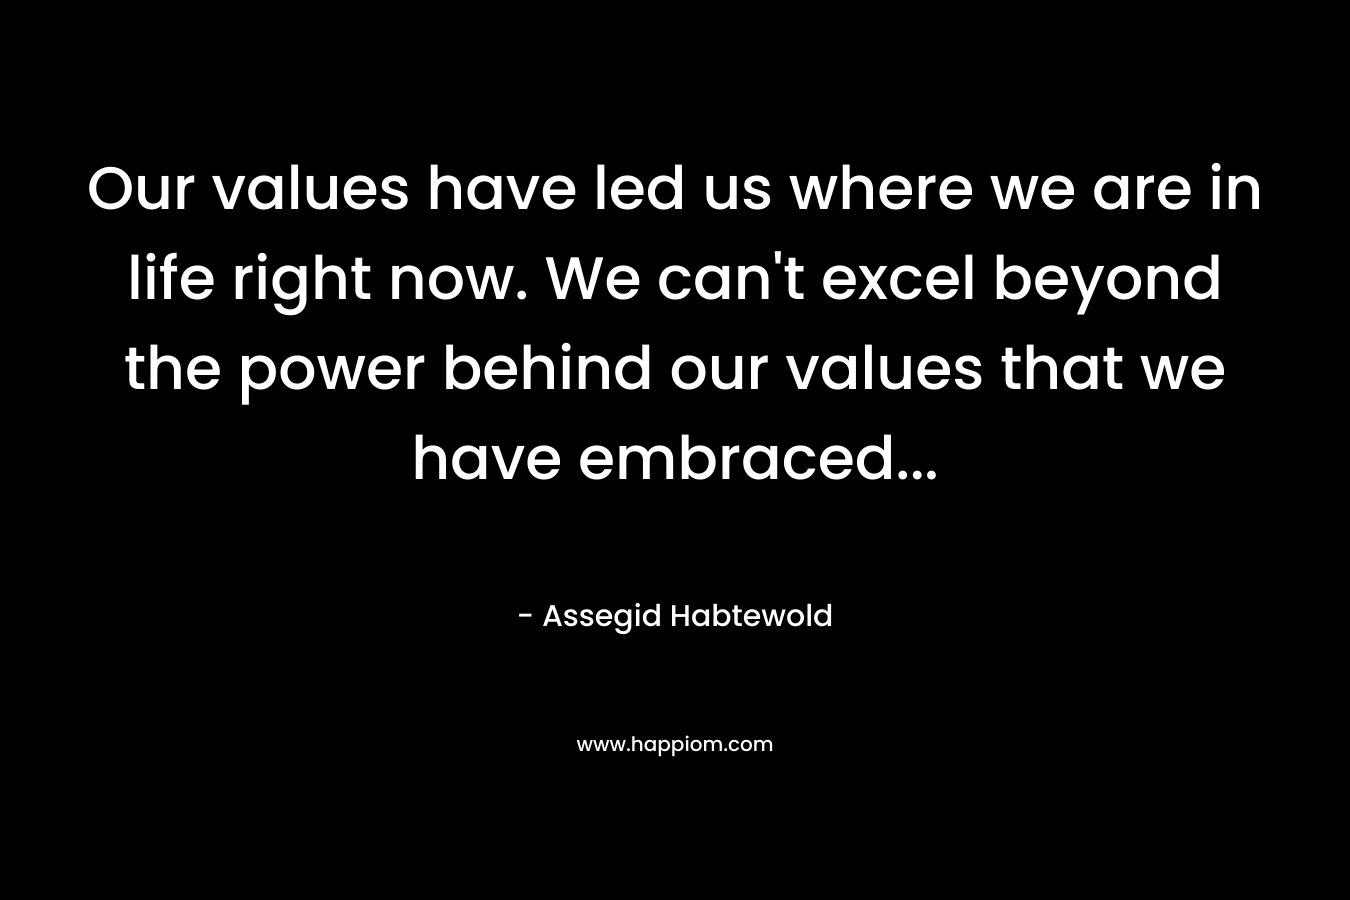 Our values have led us where we are in life right now. We can't excel beyond the power behind our values that we have embraced...